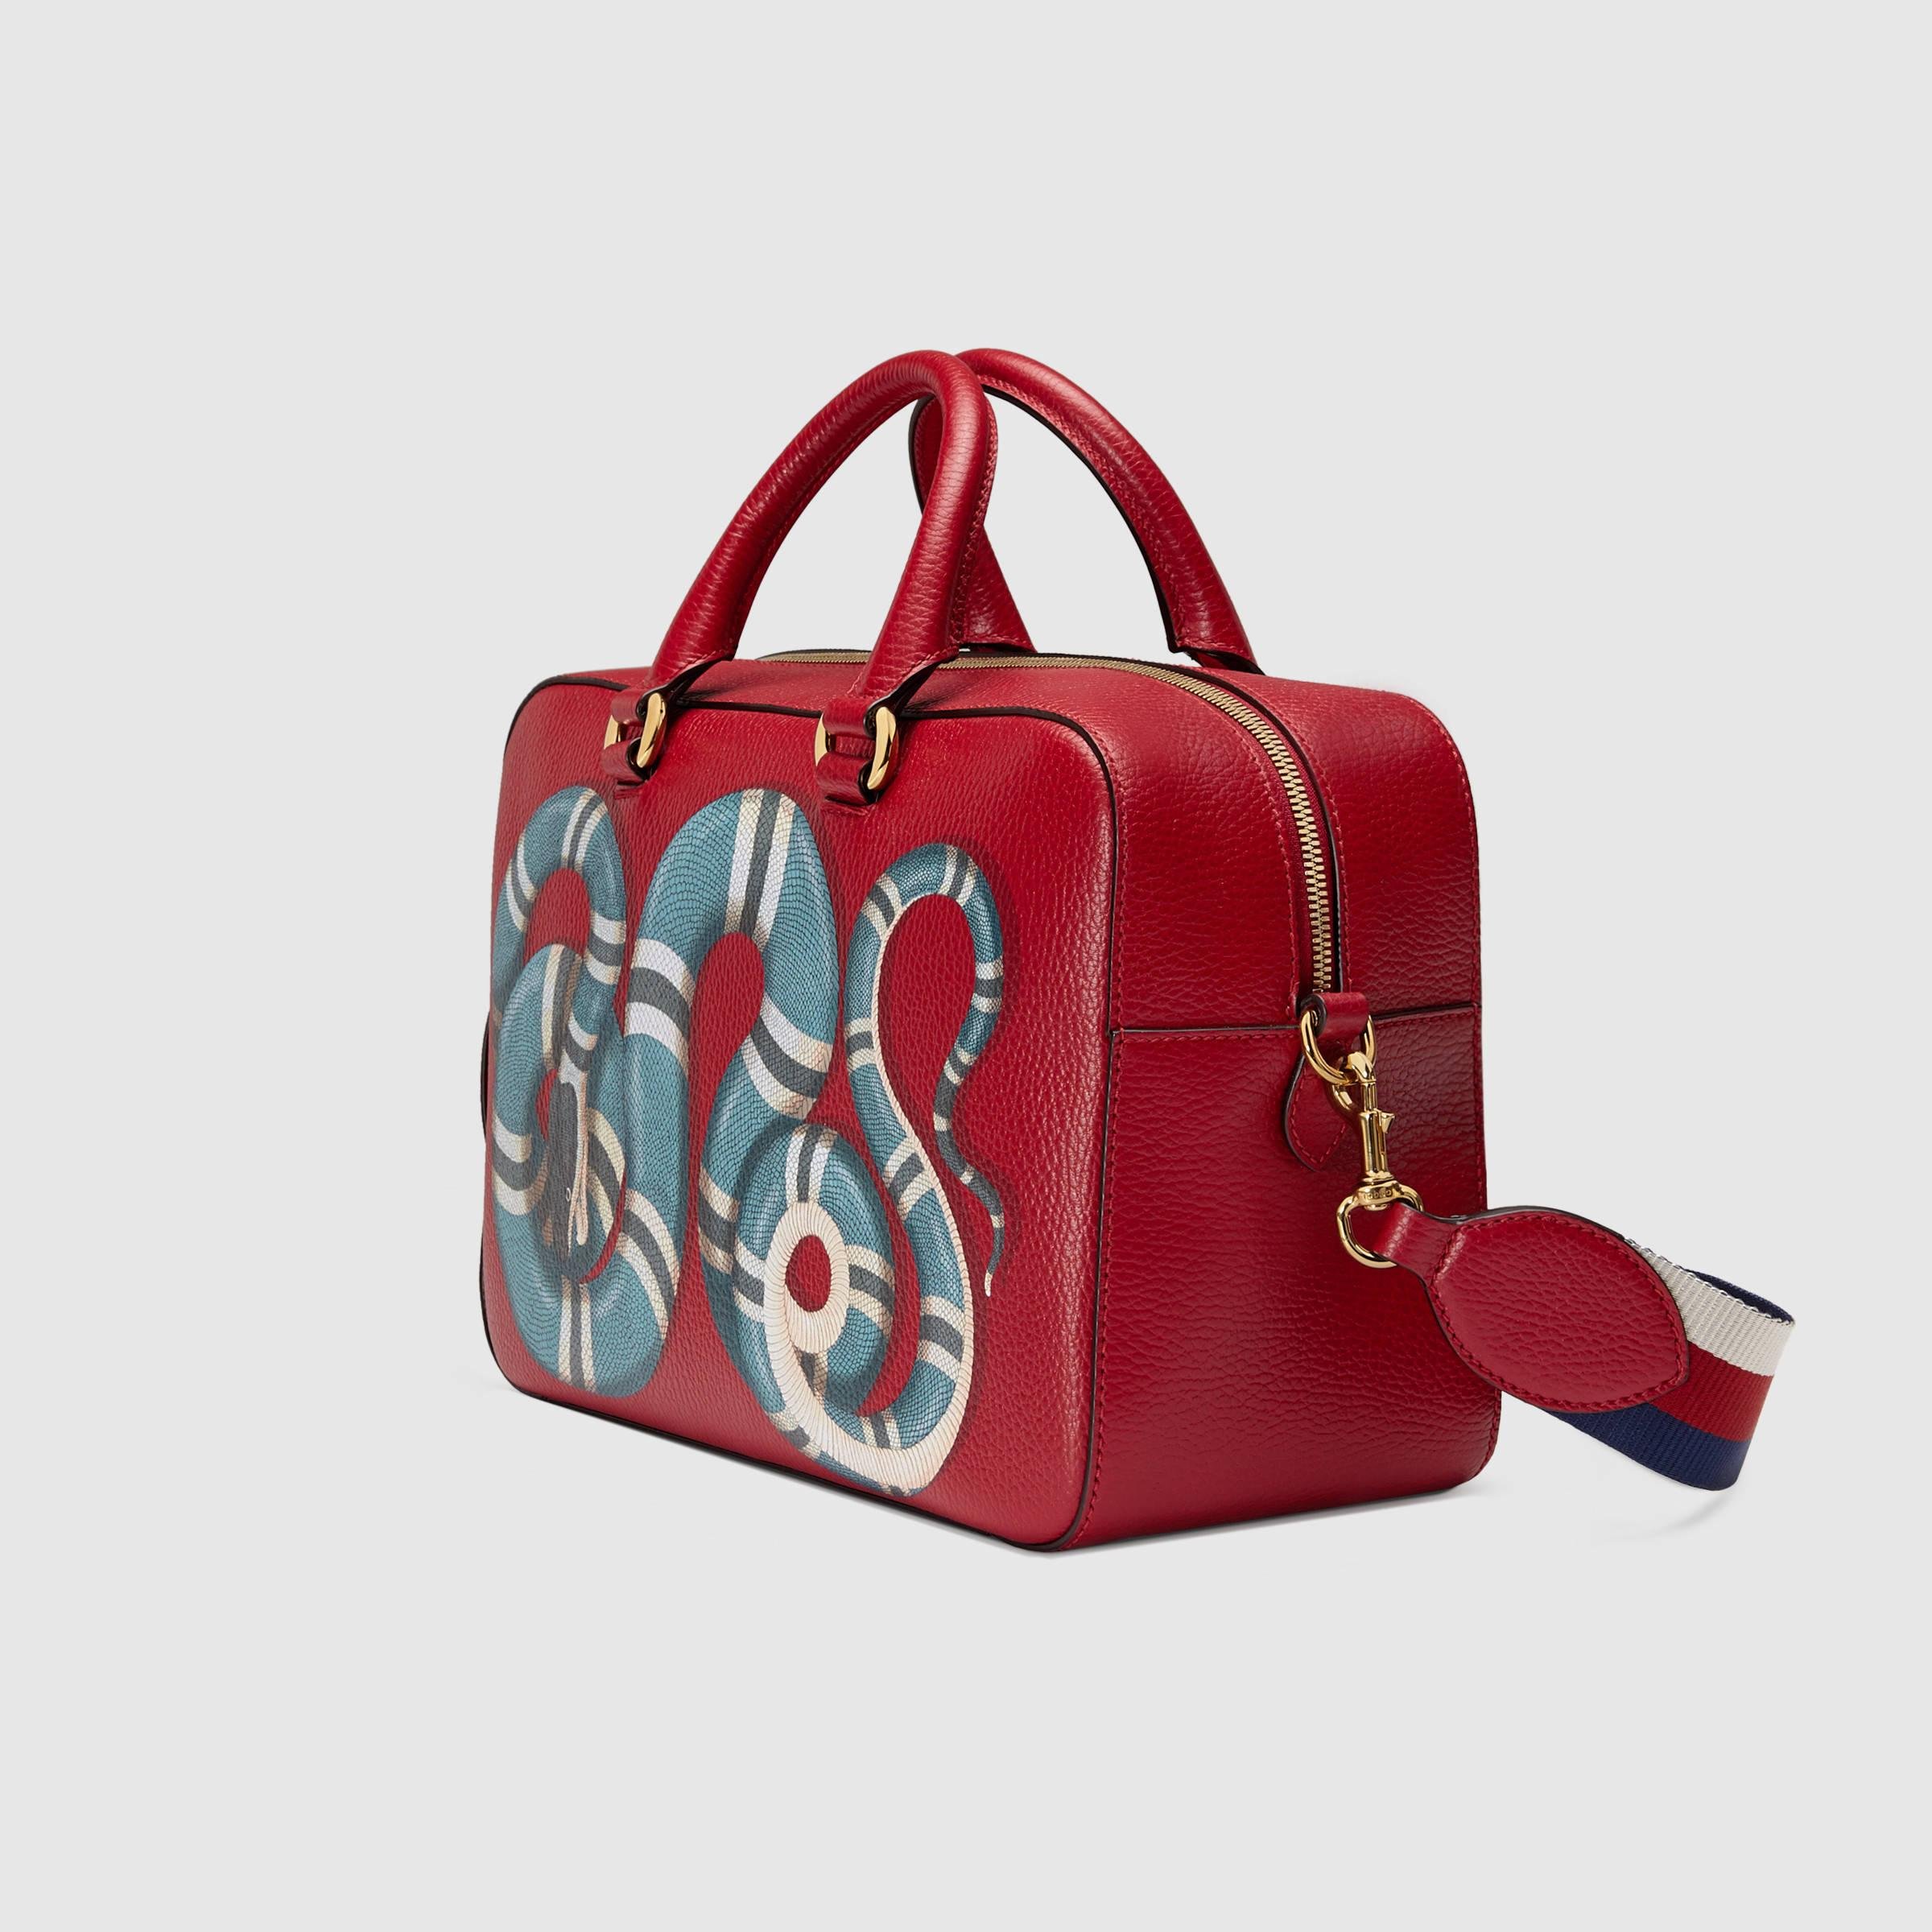 Lyst - Gucci Snake Print Leather Top Handle Bag